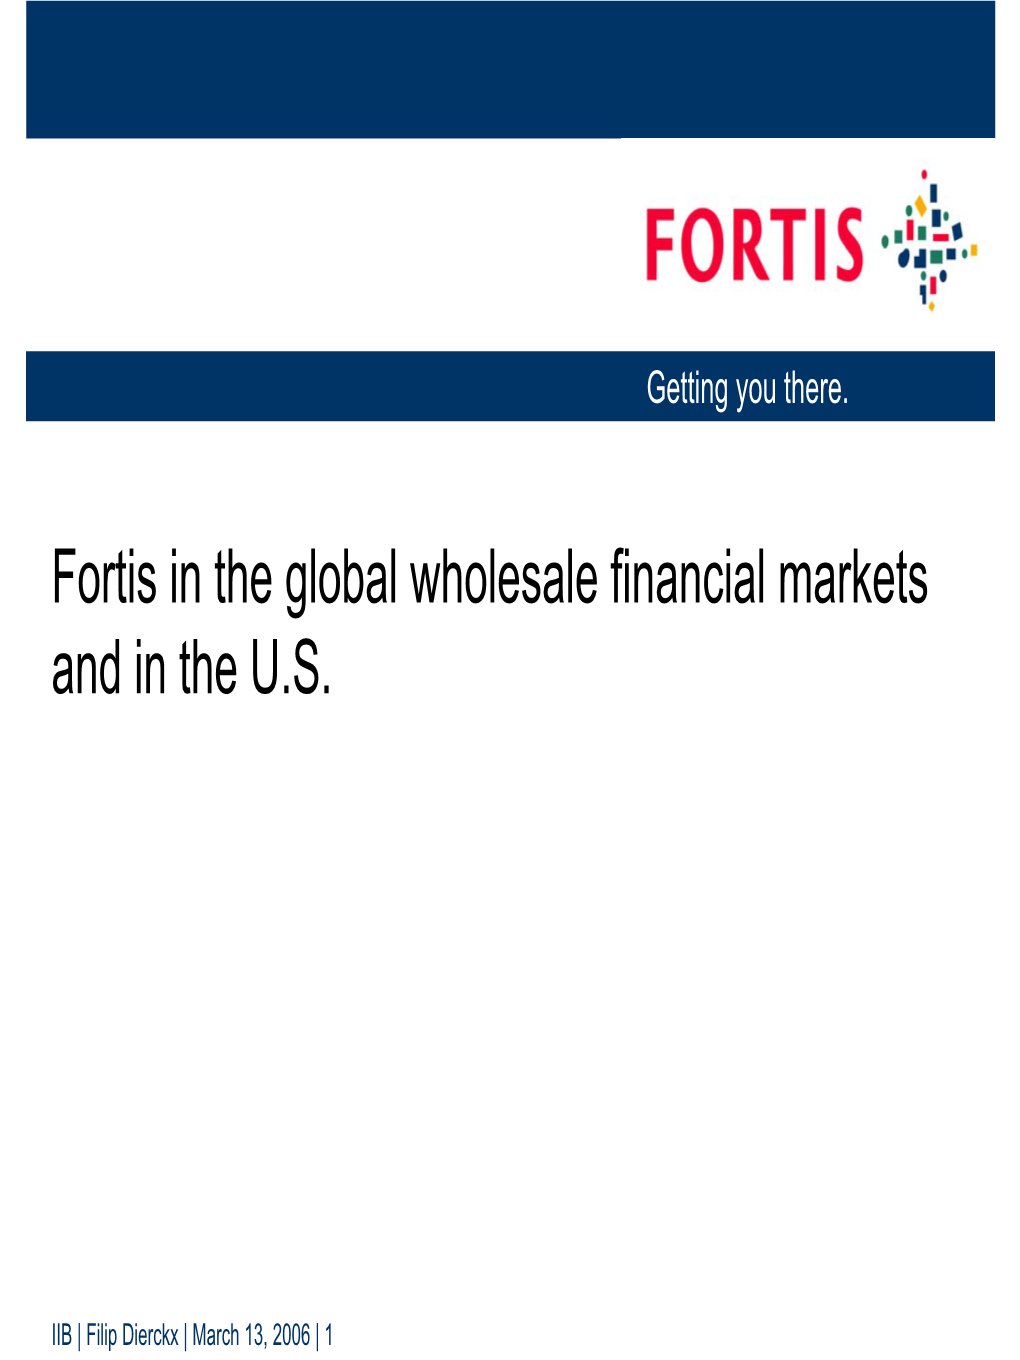 Fortis in the Global Wholesale Financial Markets and in the U.S